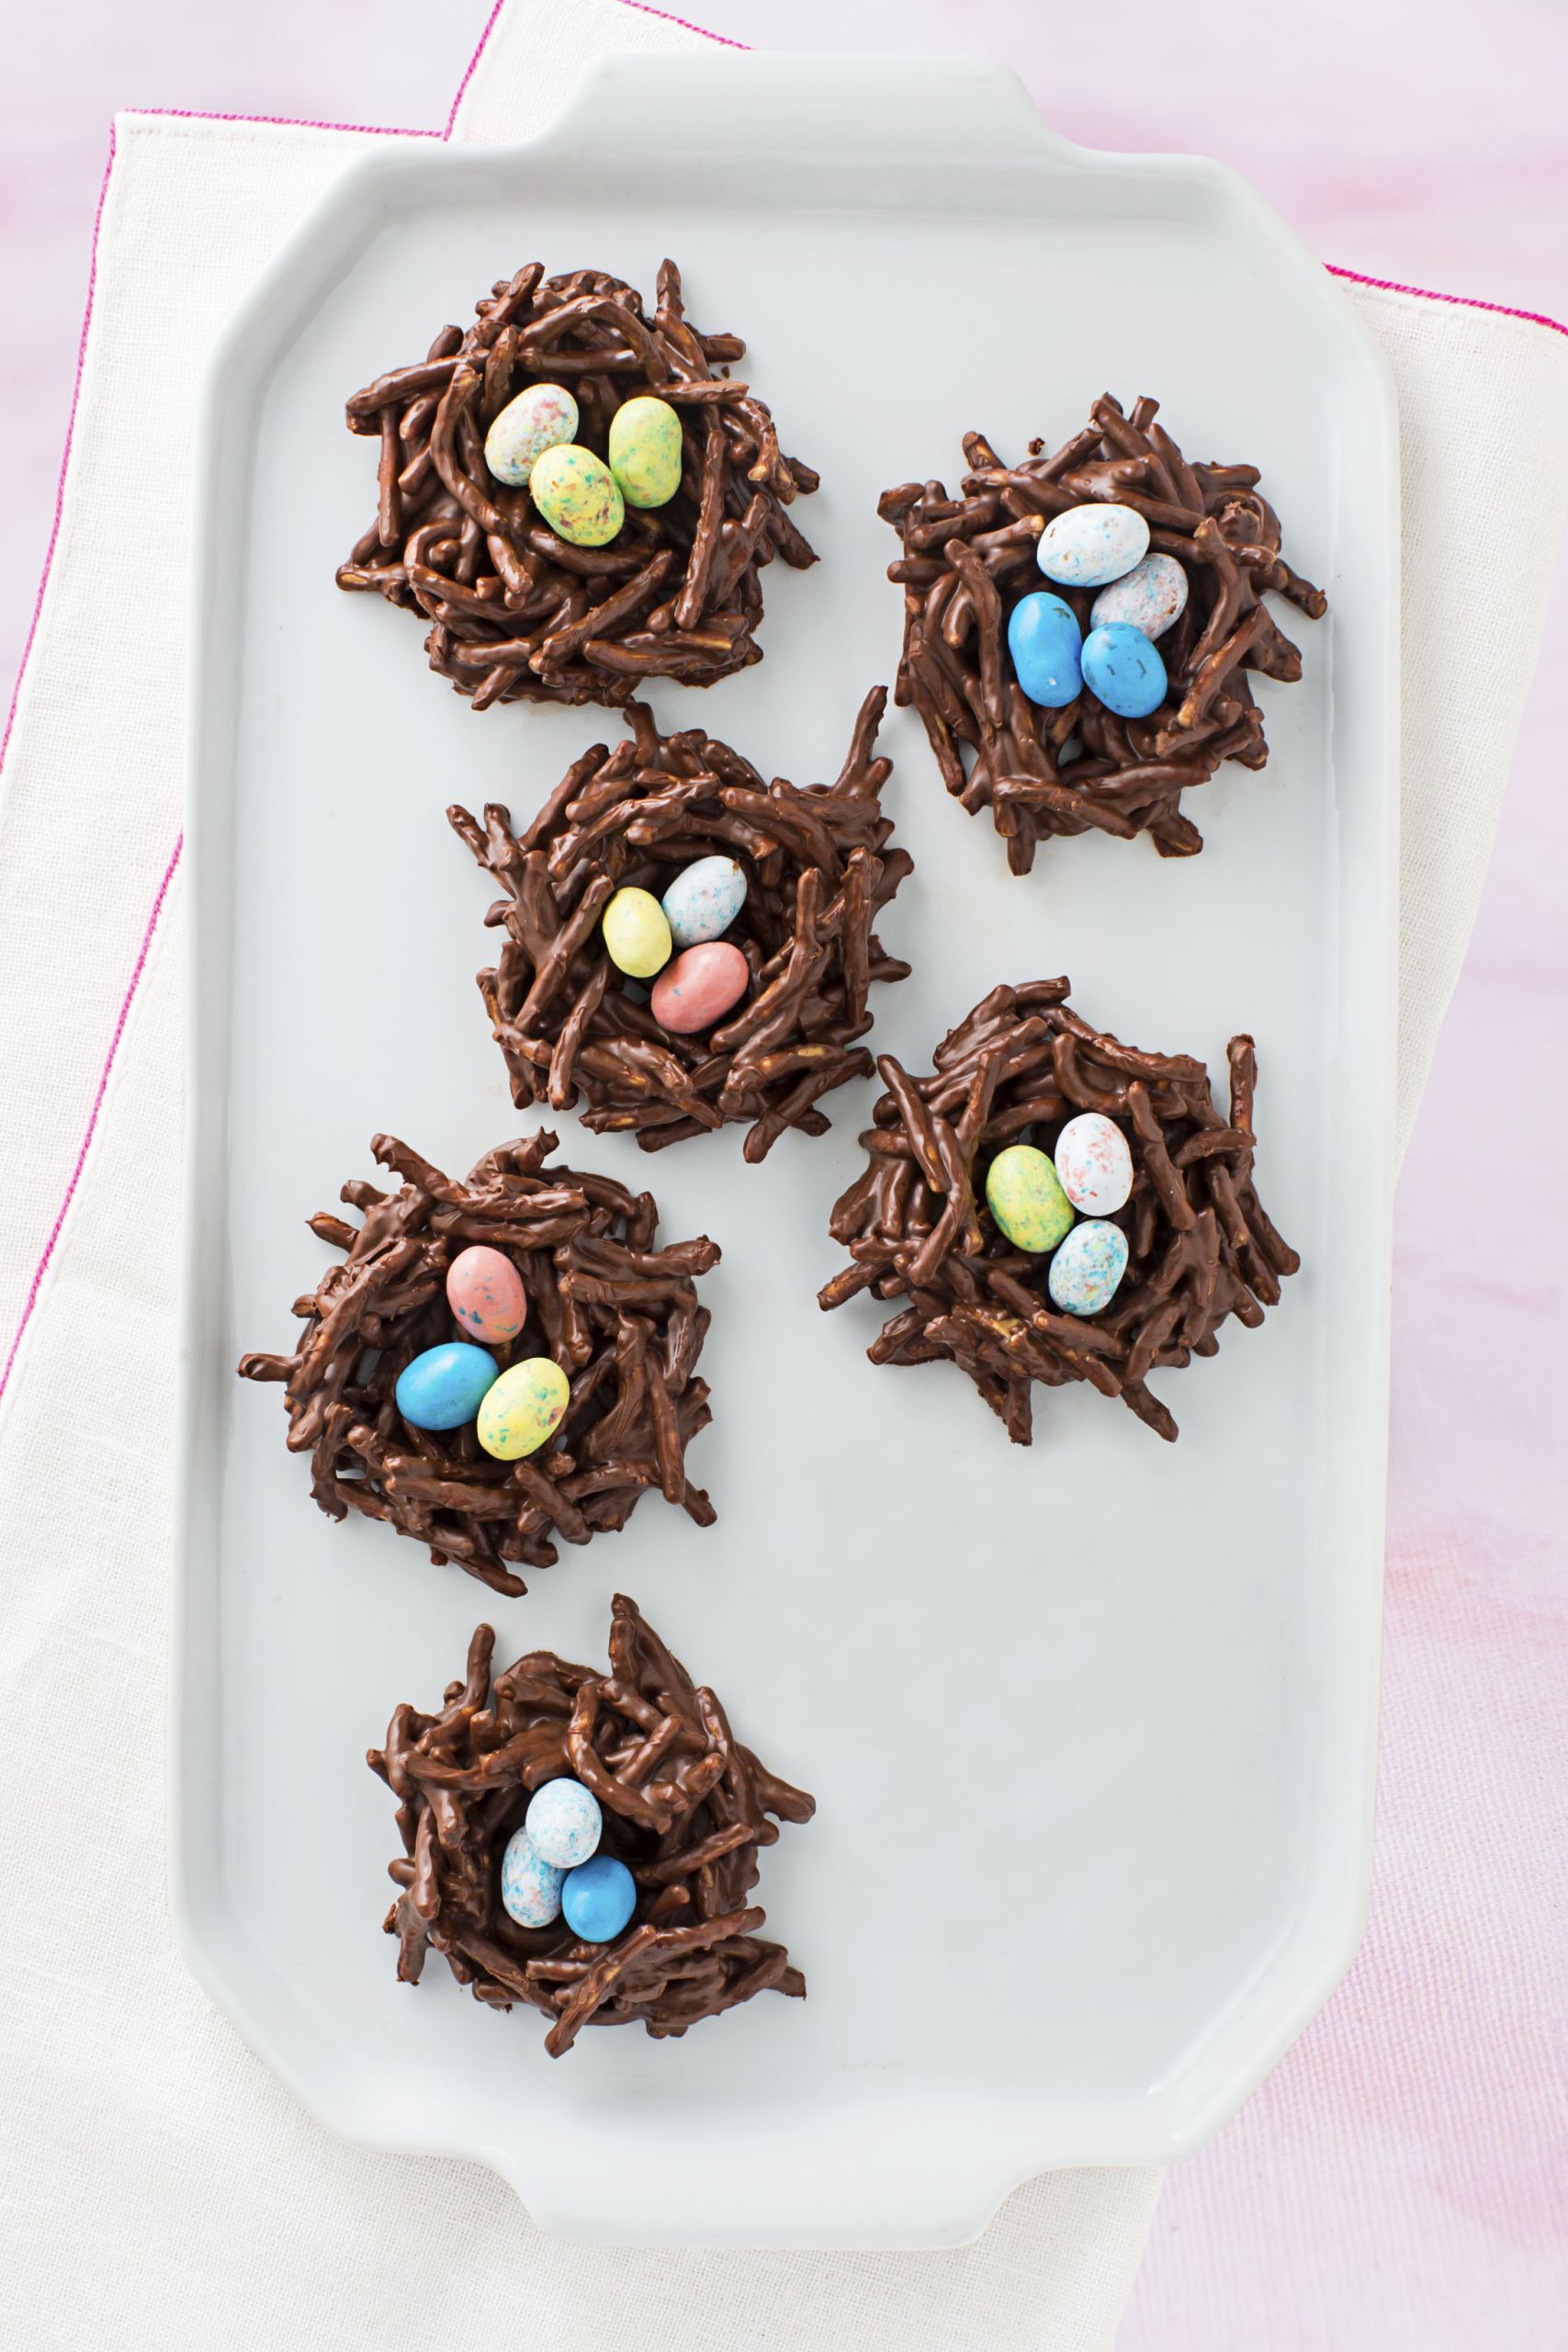 Easter Treat Ideas Lovely 30 Easy Easter Treats Cute Ideas for Easter Treats for Kids